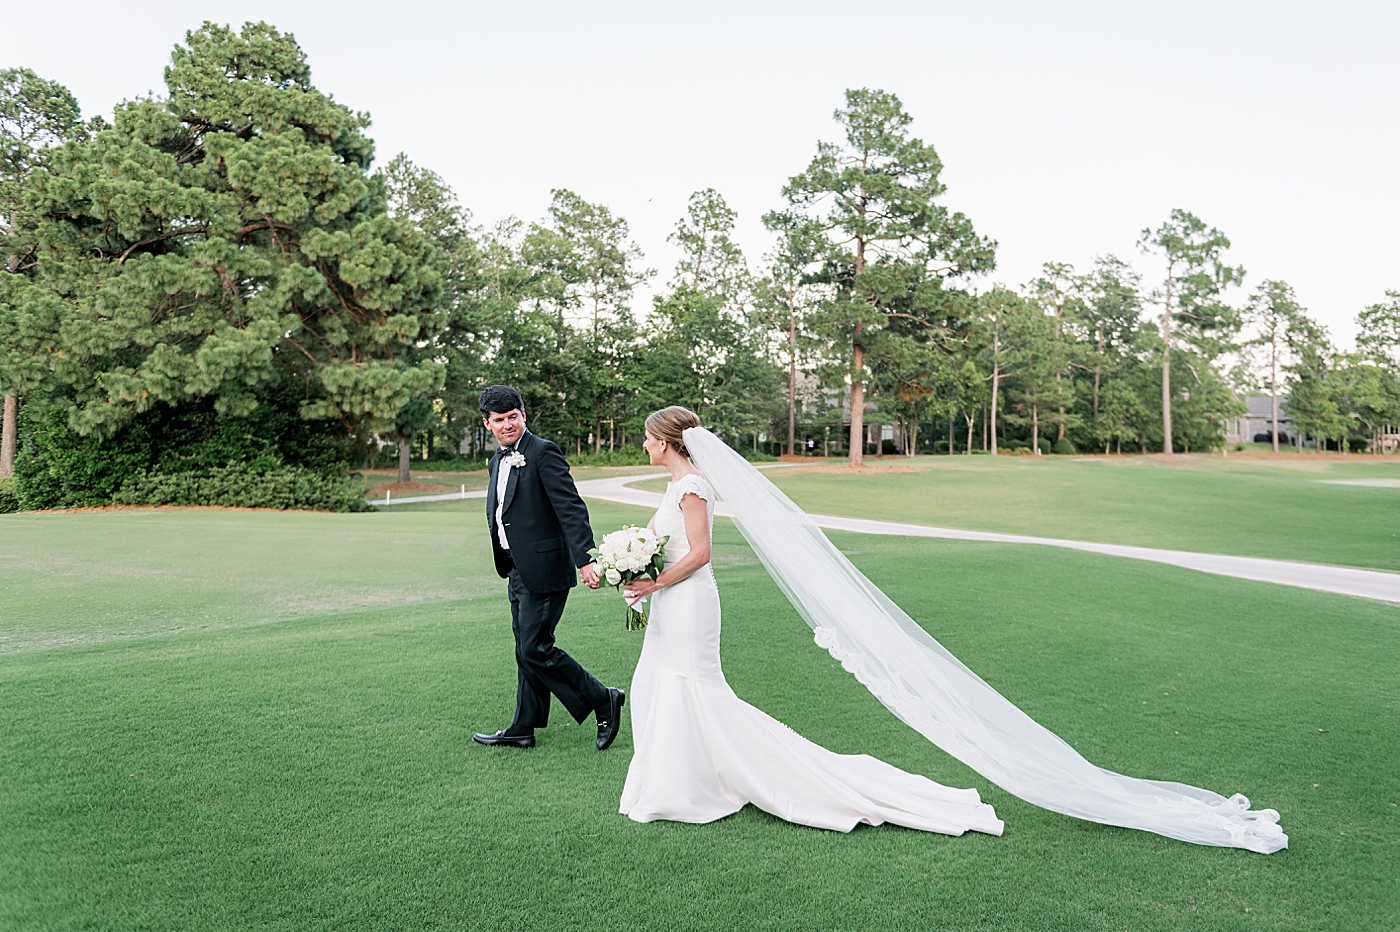 Bride and groom walking hand in hand | Image by Annie Laura Photo